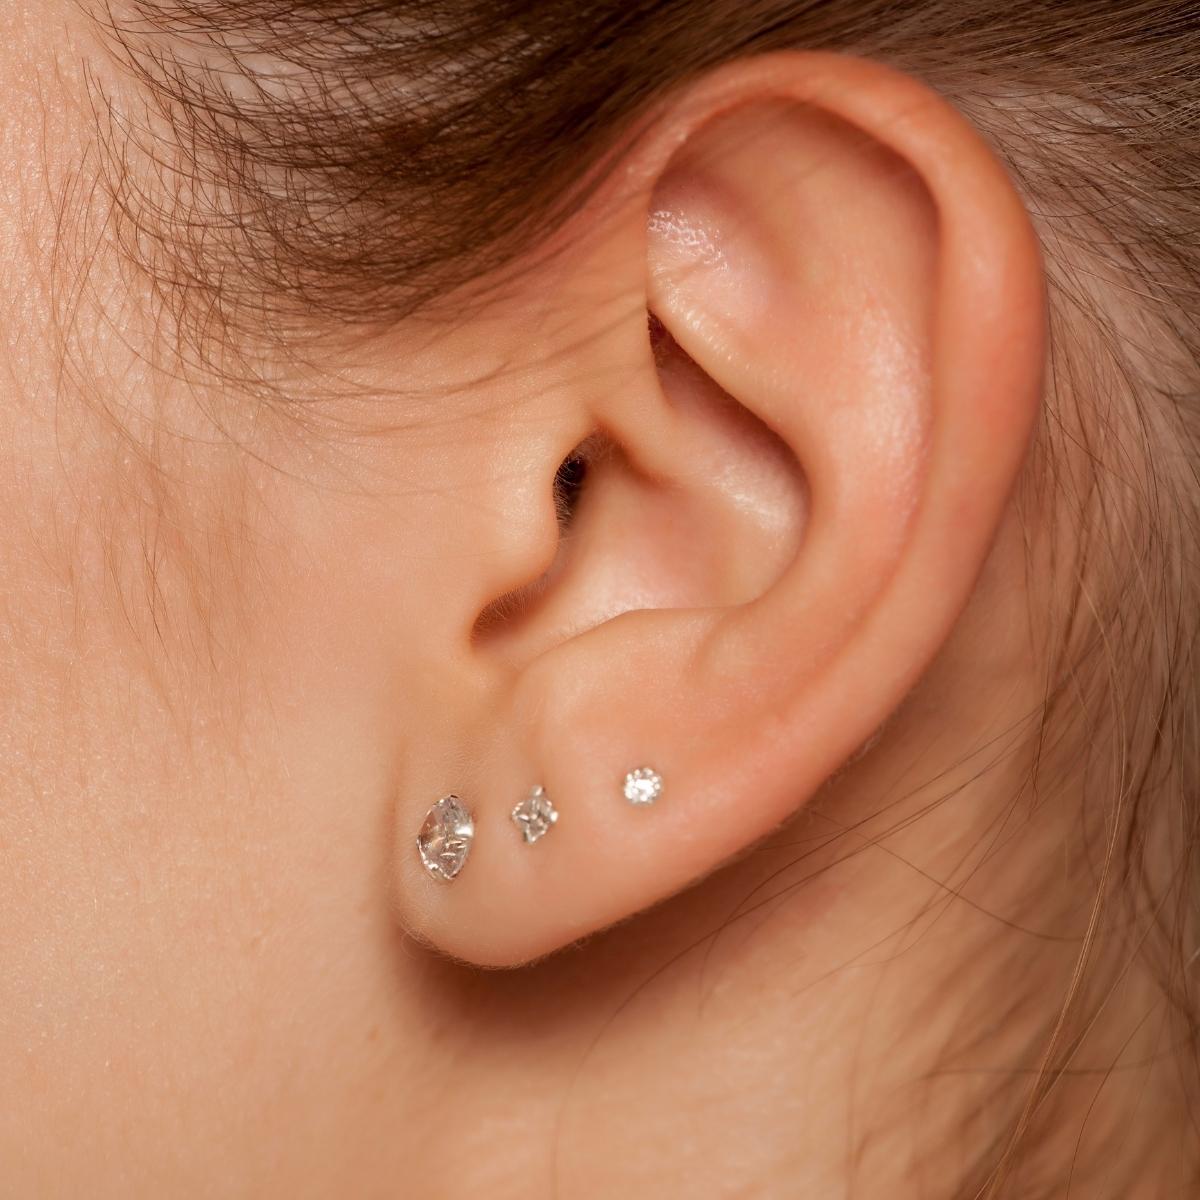 Tattoo parlors are good options for kids' ear piercing